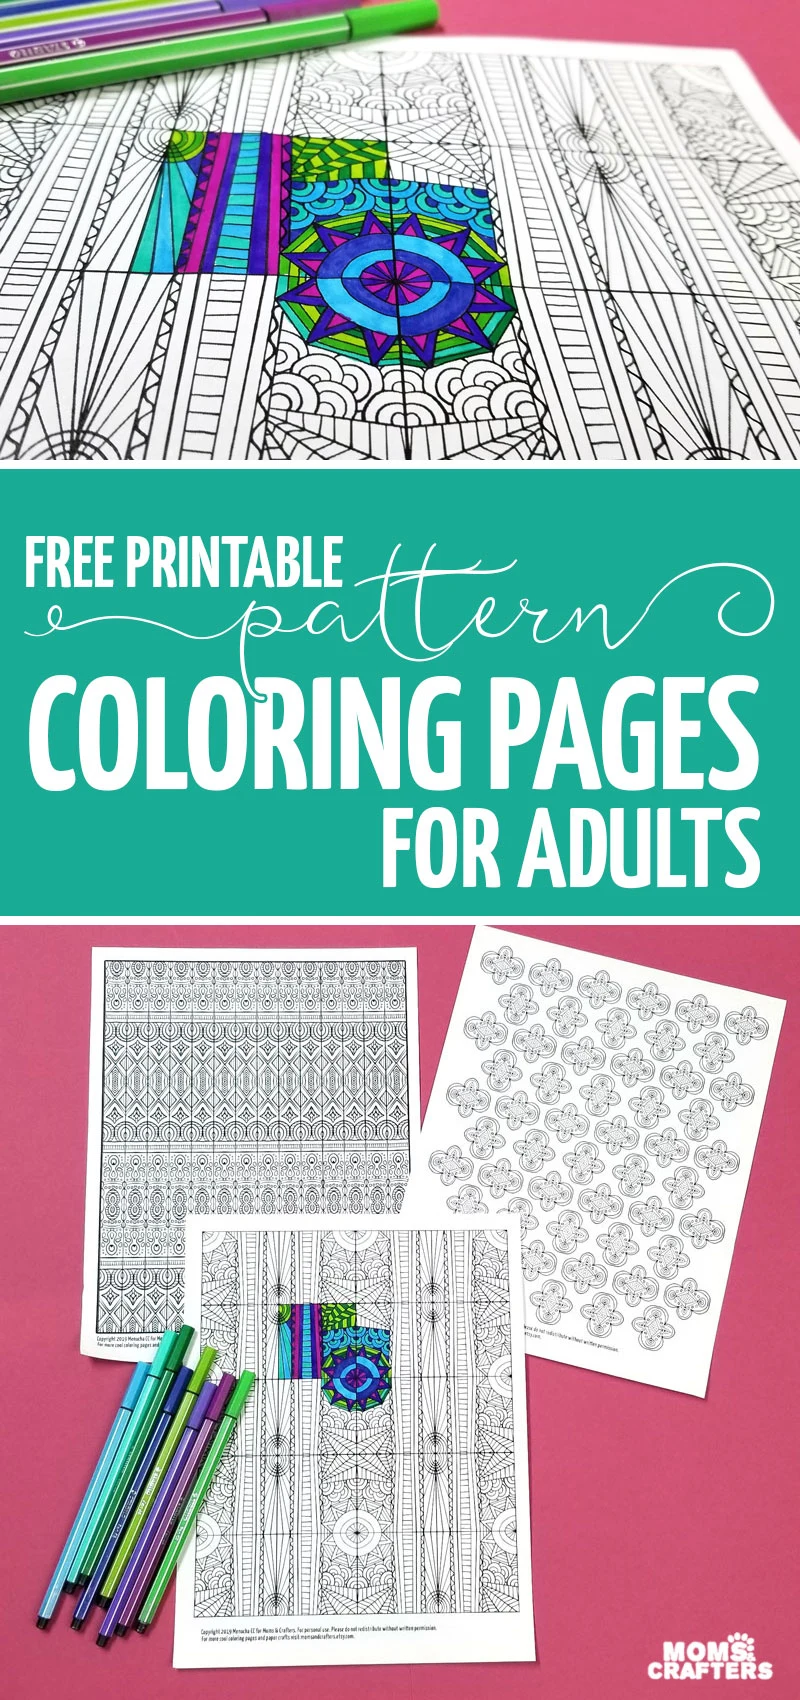 Free Printables! These pattern coloring pages are fun to use in DIY cards, gift wrap, and other paper crafts. Or color these coloring pages for adults just for fun, relaxation, meditation, and to relieve stress. Patterns make great anti anxiety coloring pages!